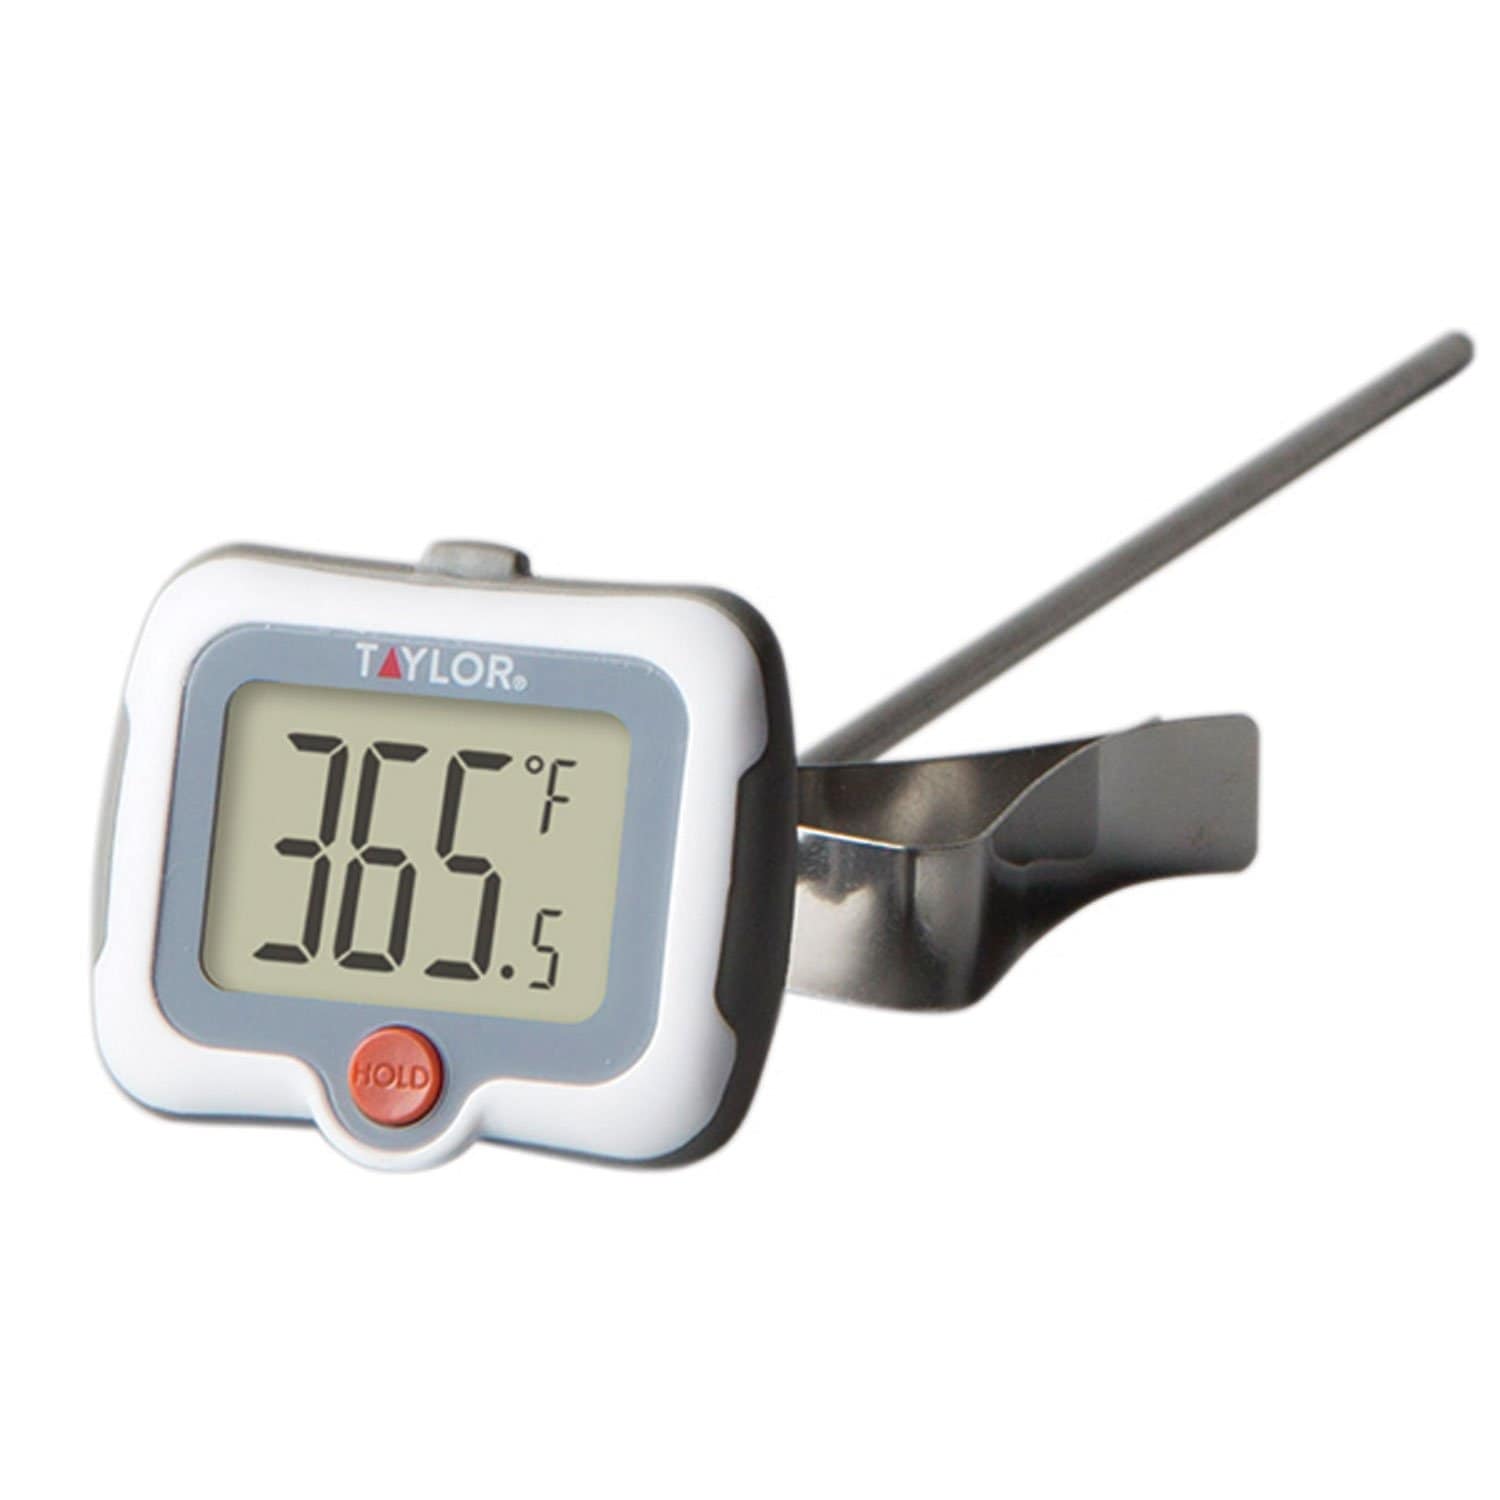 Digital Candy Thermometer, 983915